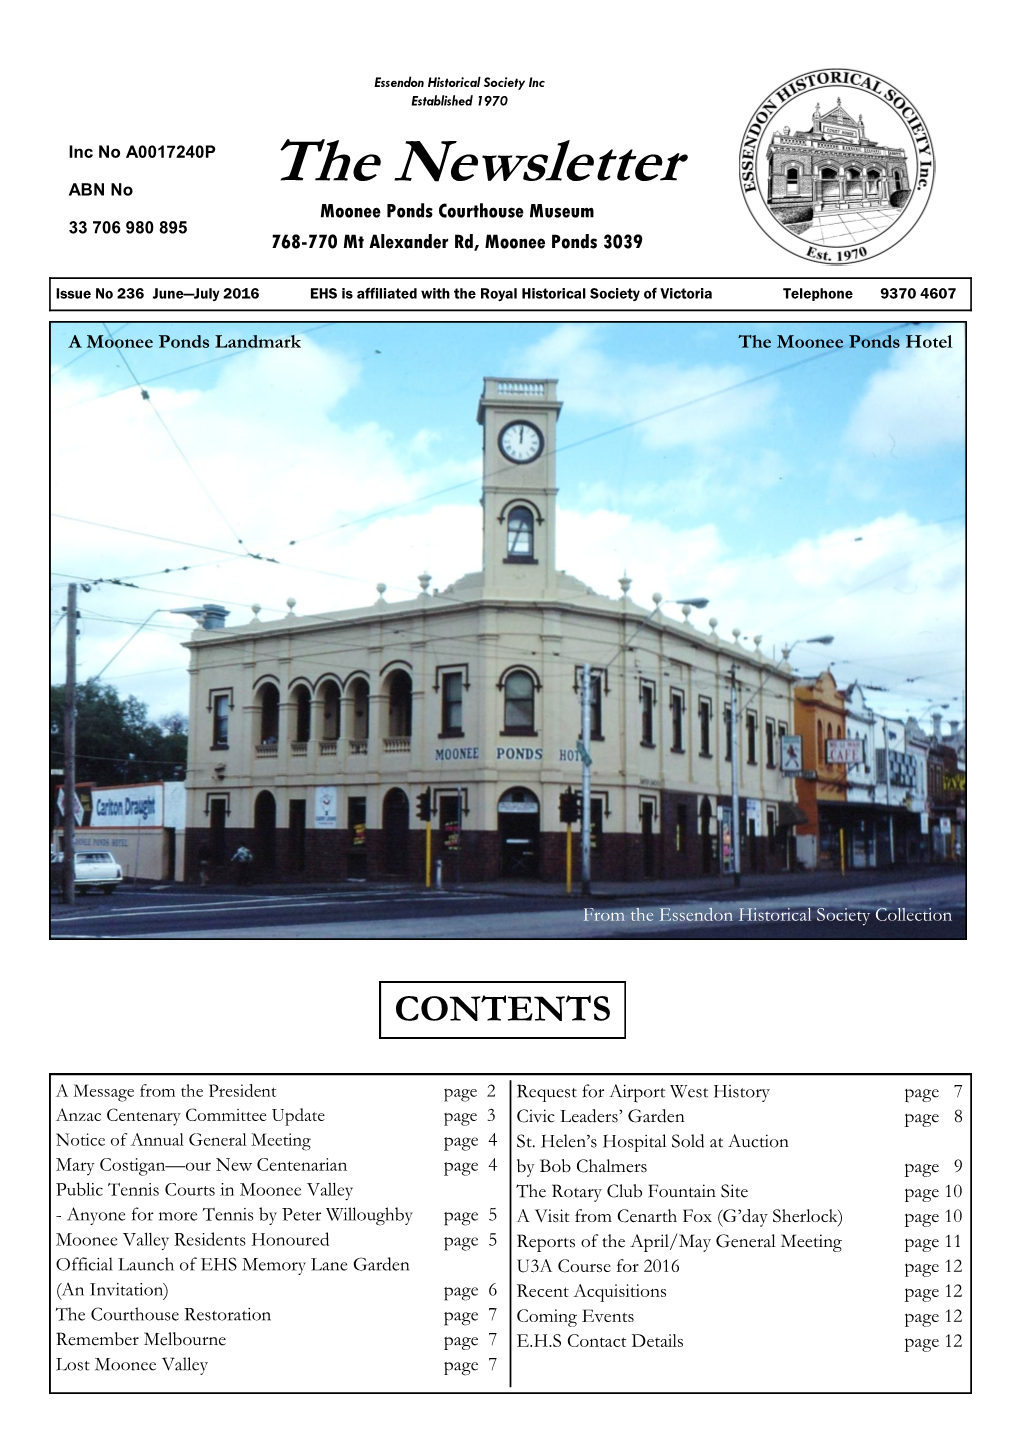 The Newsletter Moonee Ponds Courthouse Museum 33 706 980 895 768-770 Mt Alexander Rd, Moonee Ponds 3039